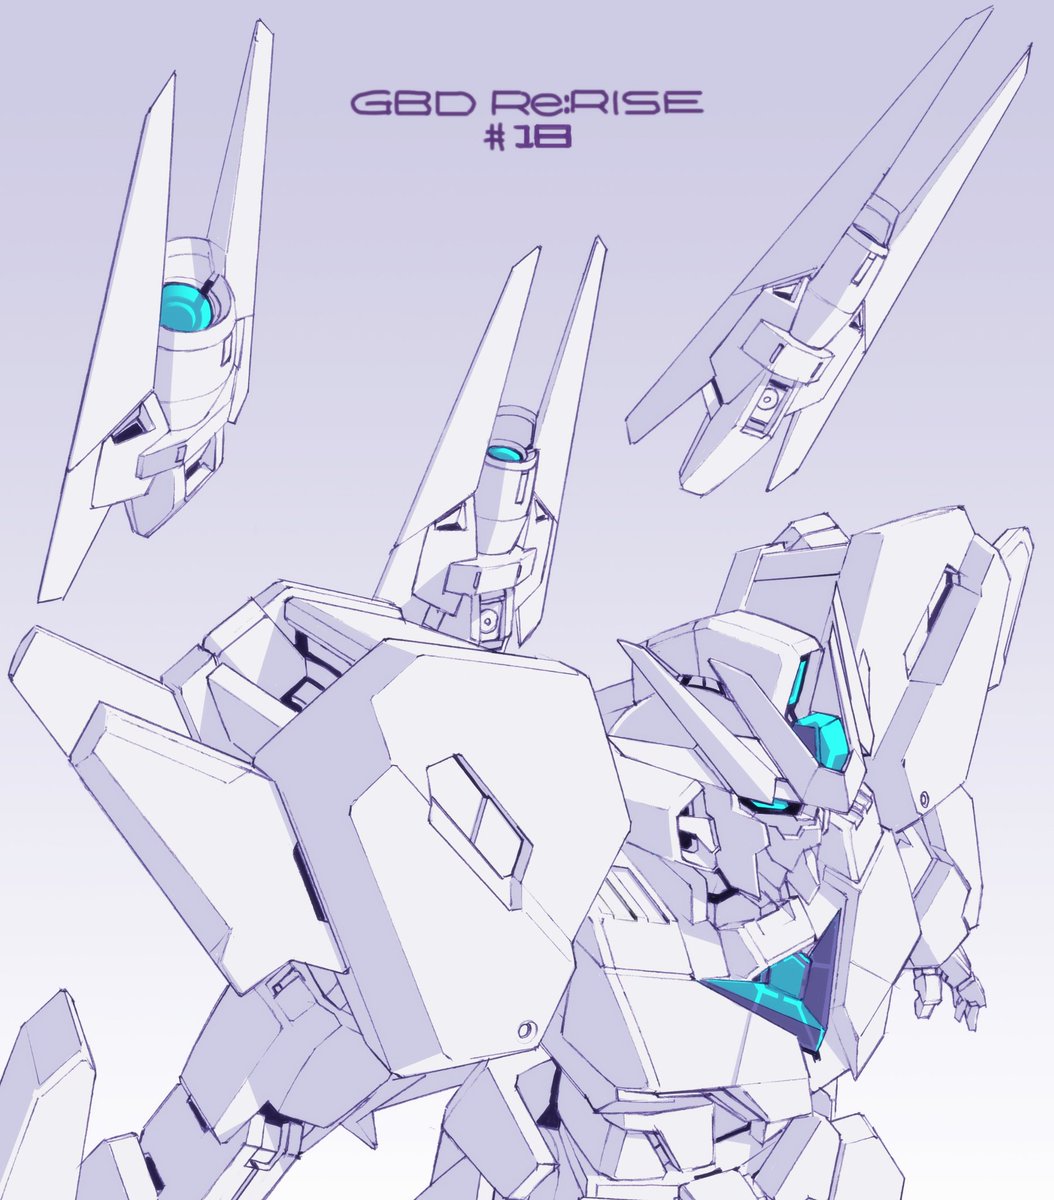 Whats you favorite kind of Weapon in Gundam?Mine is the Bits, Funnels, Fang...